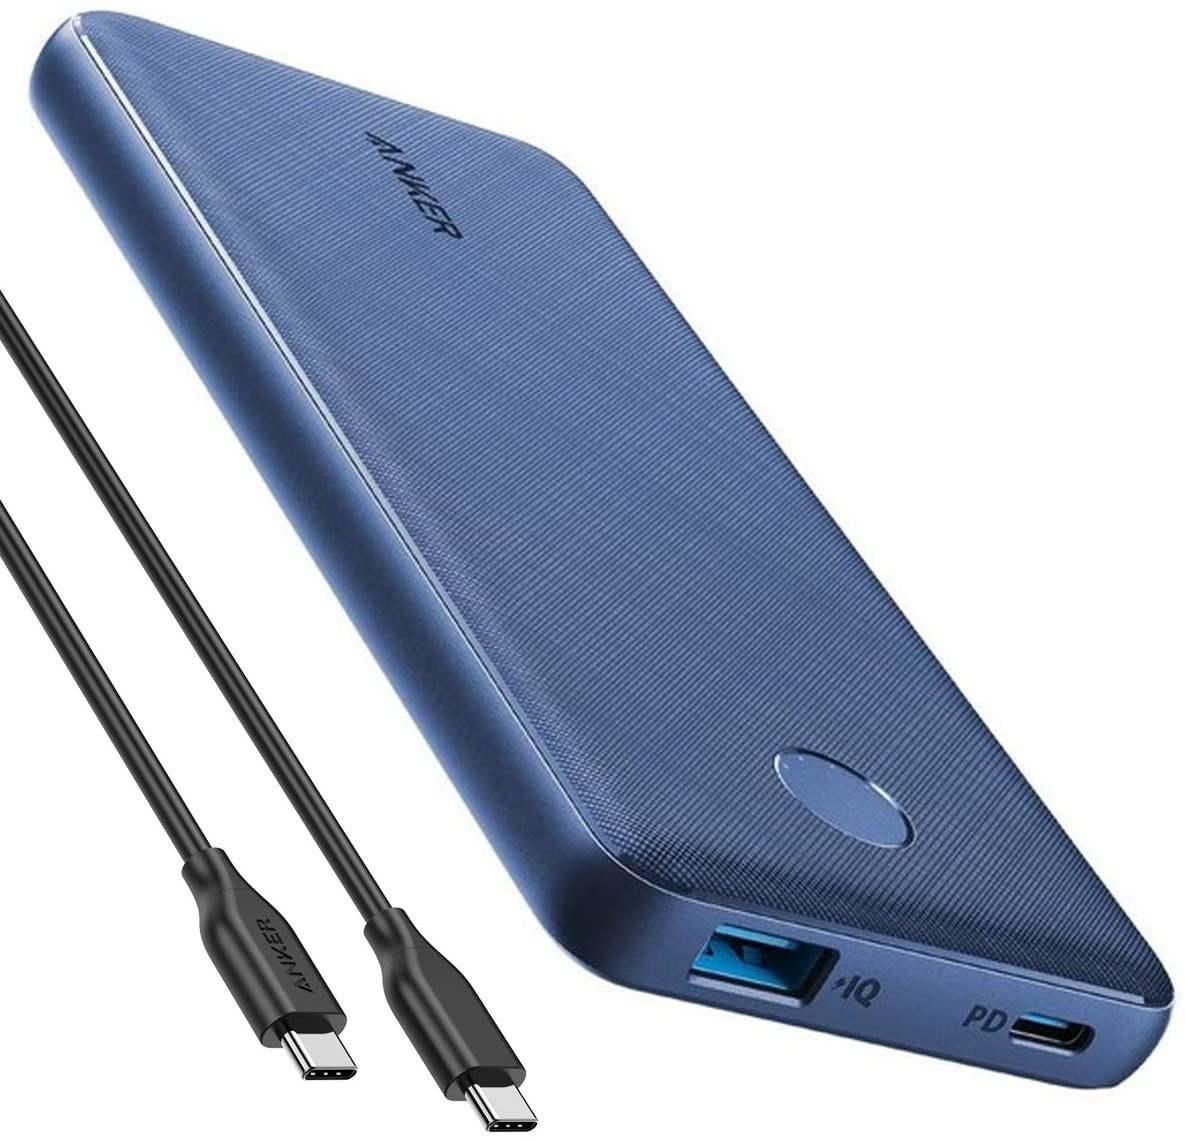 This portable battery has a slim design, 18W fast charging, and both USB Type-A and Type-C connectors.